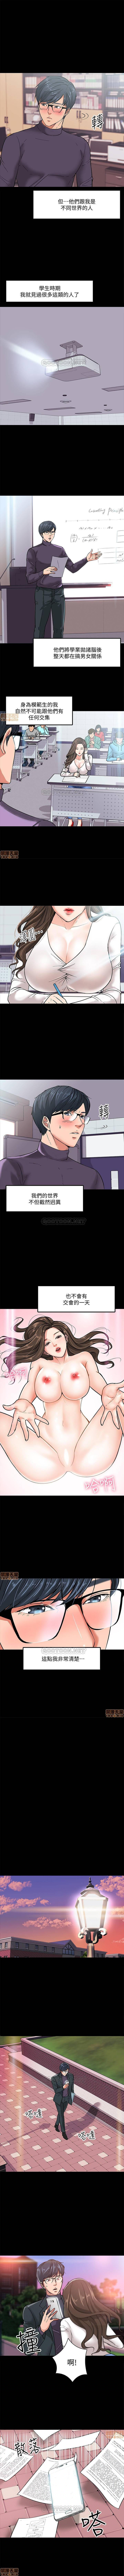 Masseur PROFESSOR, ARE YOU JUST GOING TO LOOK AT ME? | DESIRE SWAMP | 教授，你還等什麼? Ch. 2 [Chinese] Manhwa Car - Page 6